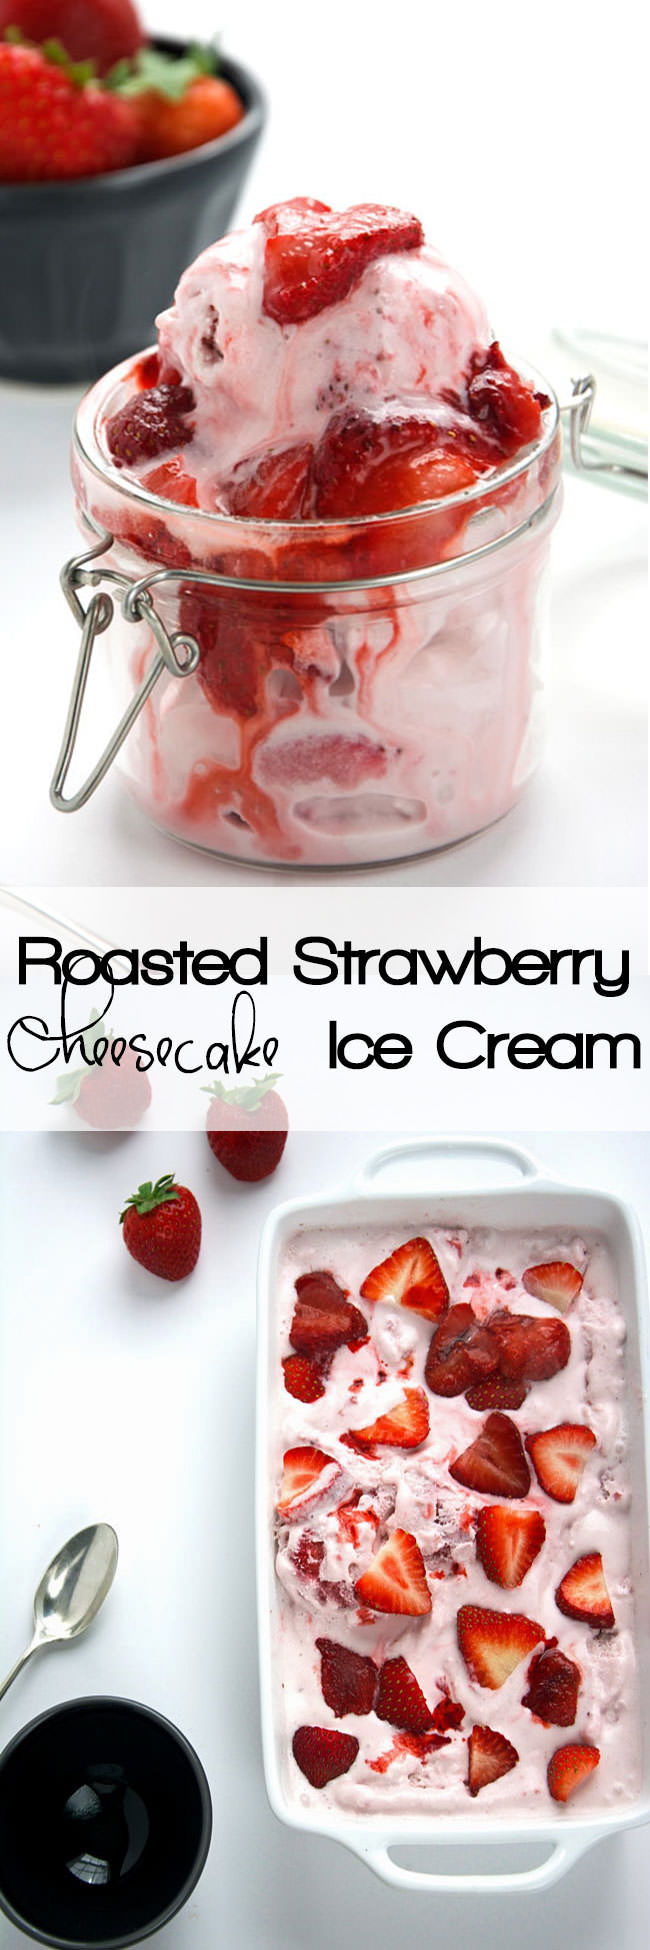 Creamy cheesecake ice cream made lighter with coconut and almond milk, and stuffed with caramelized, roasted strawberries for one heavenly frozen dessert! 